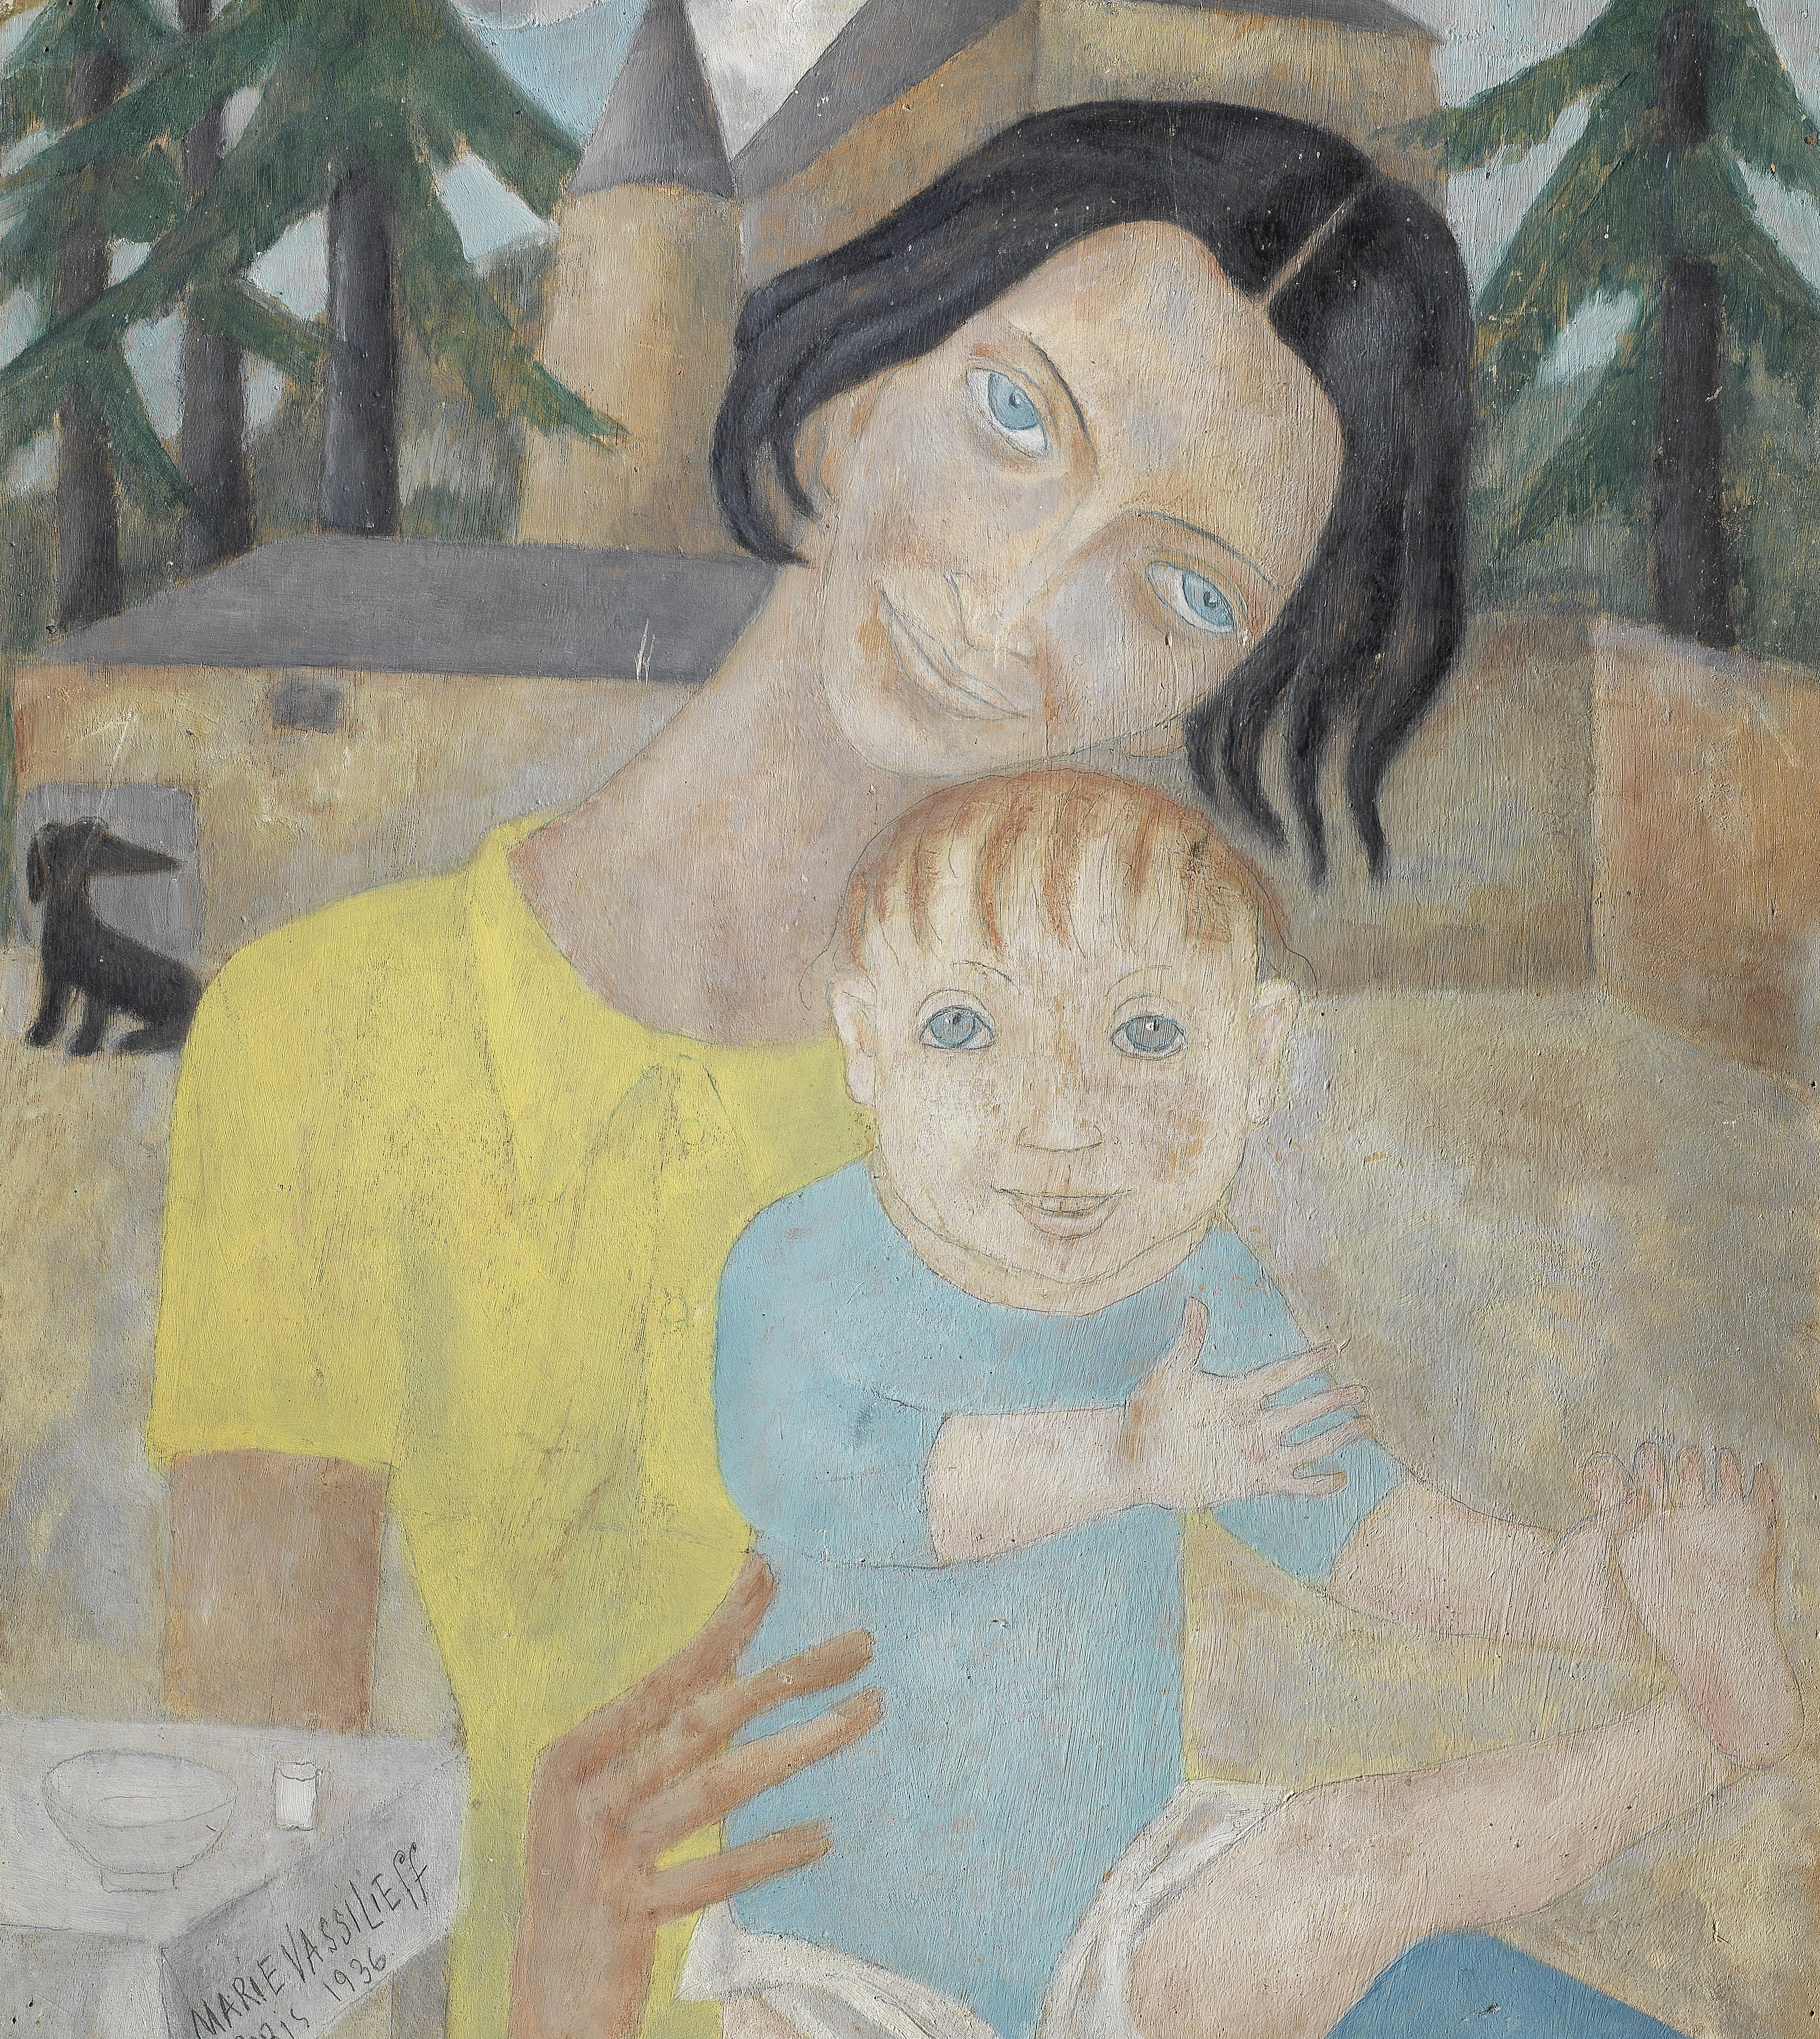 Marie Vassilieff (Russian, 1884-1957) Mother and a child